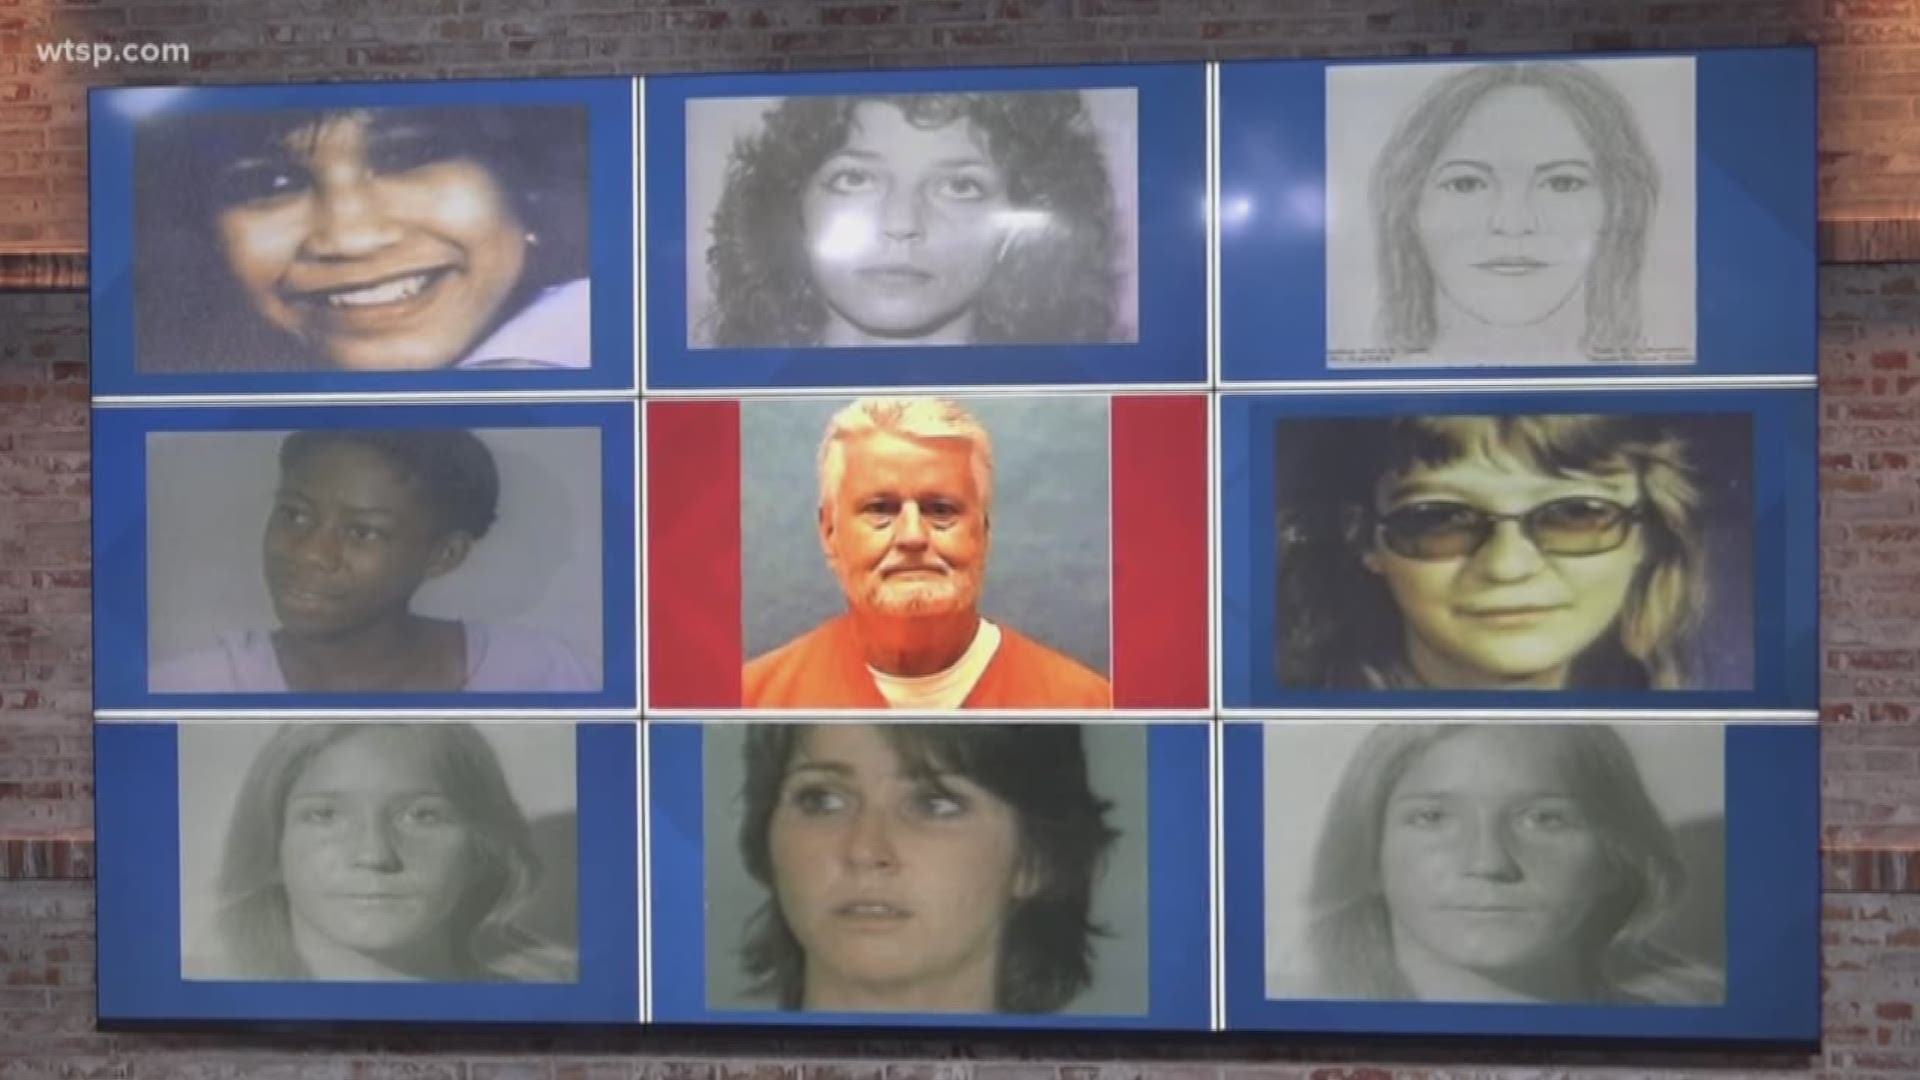 The relatives of one of Bobby Joe Long's victims say they feel no forgiveness for him.